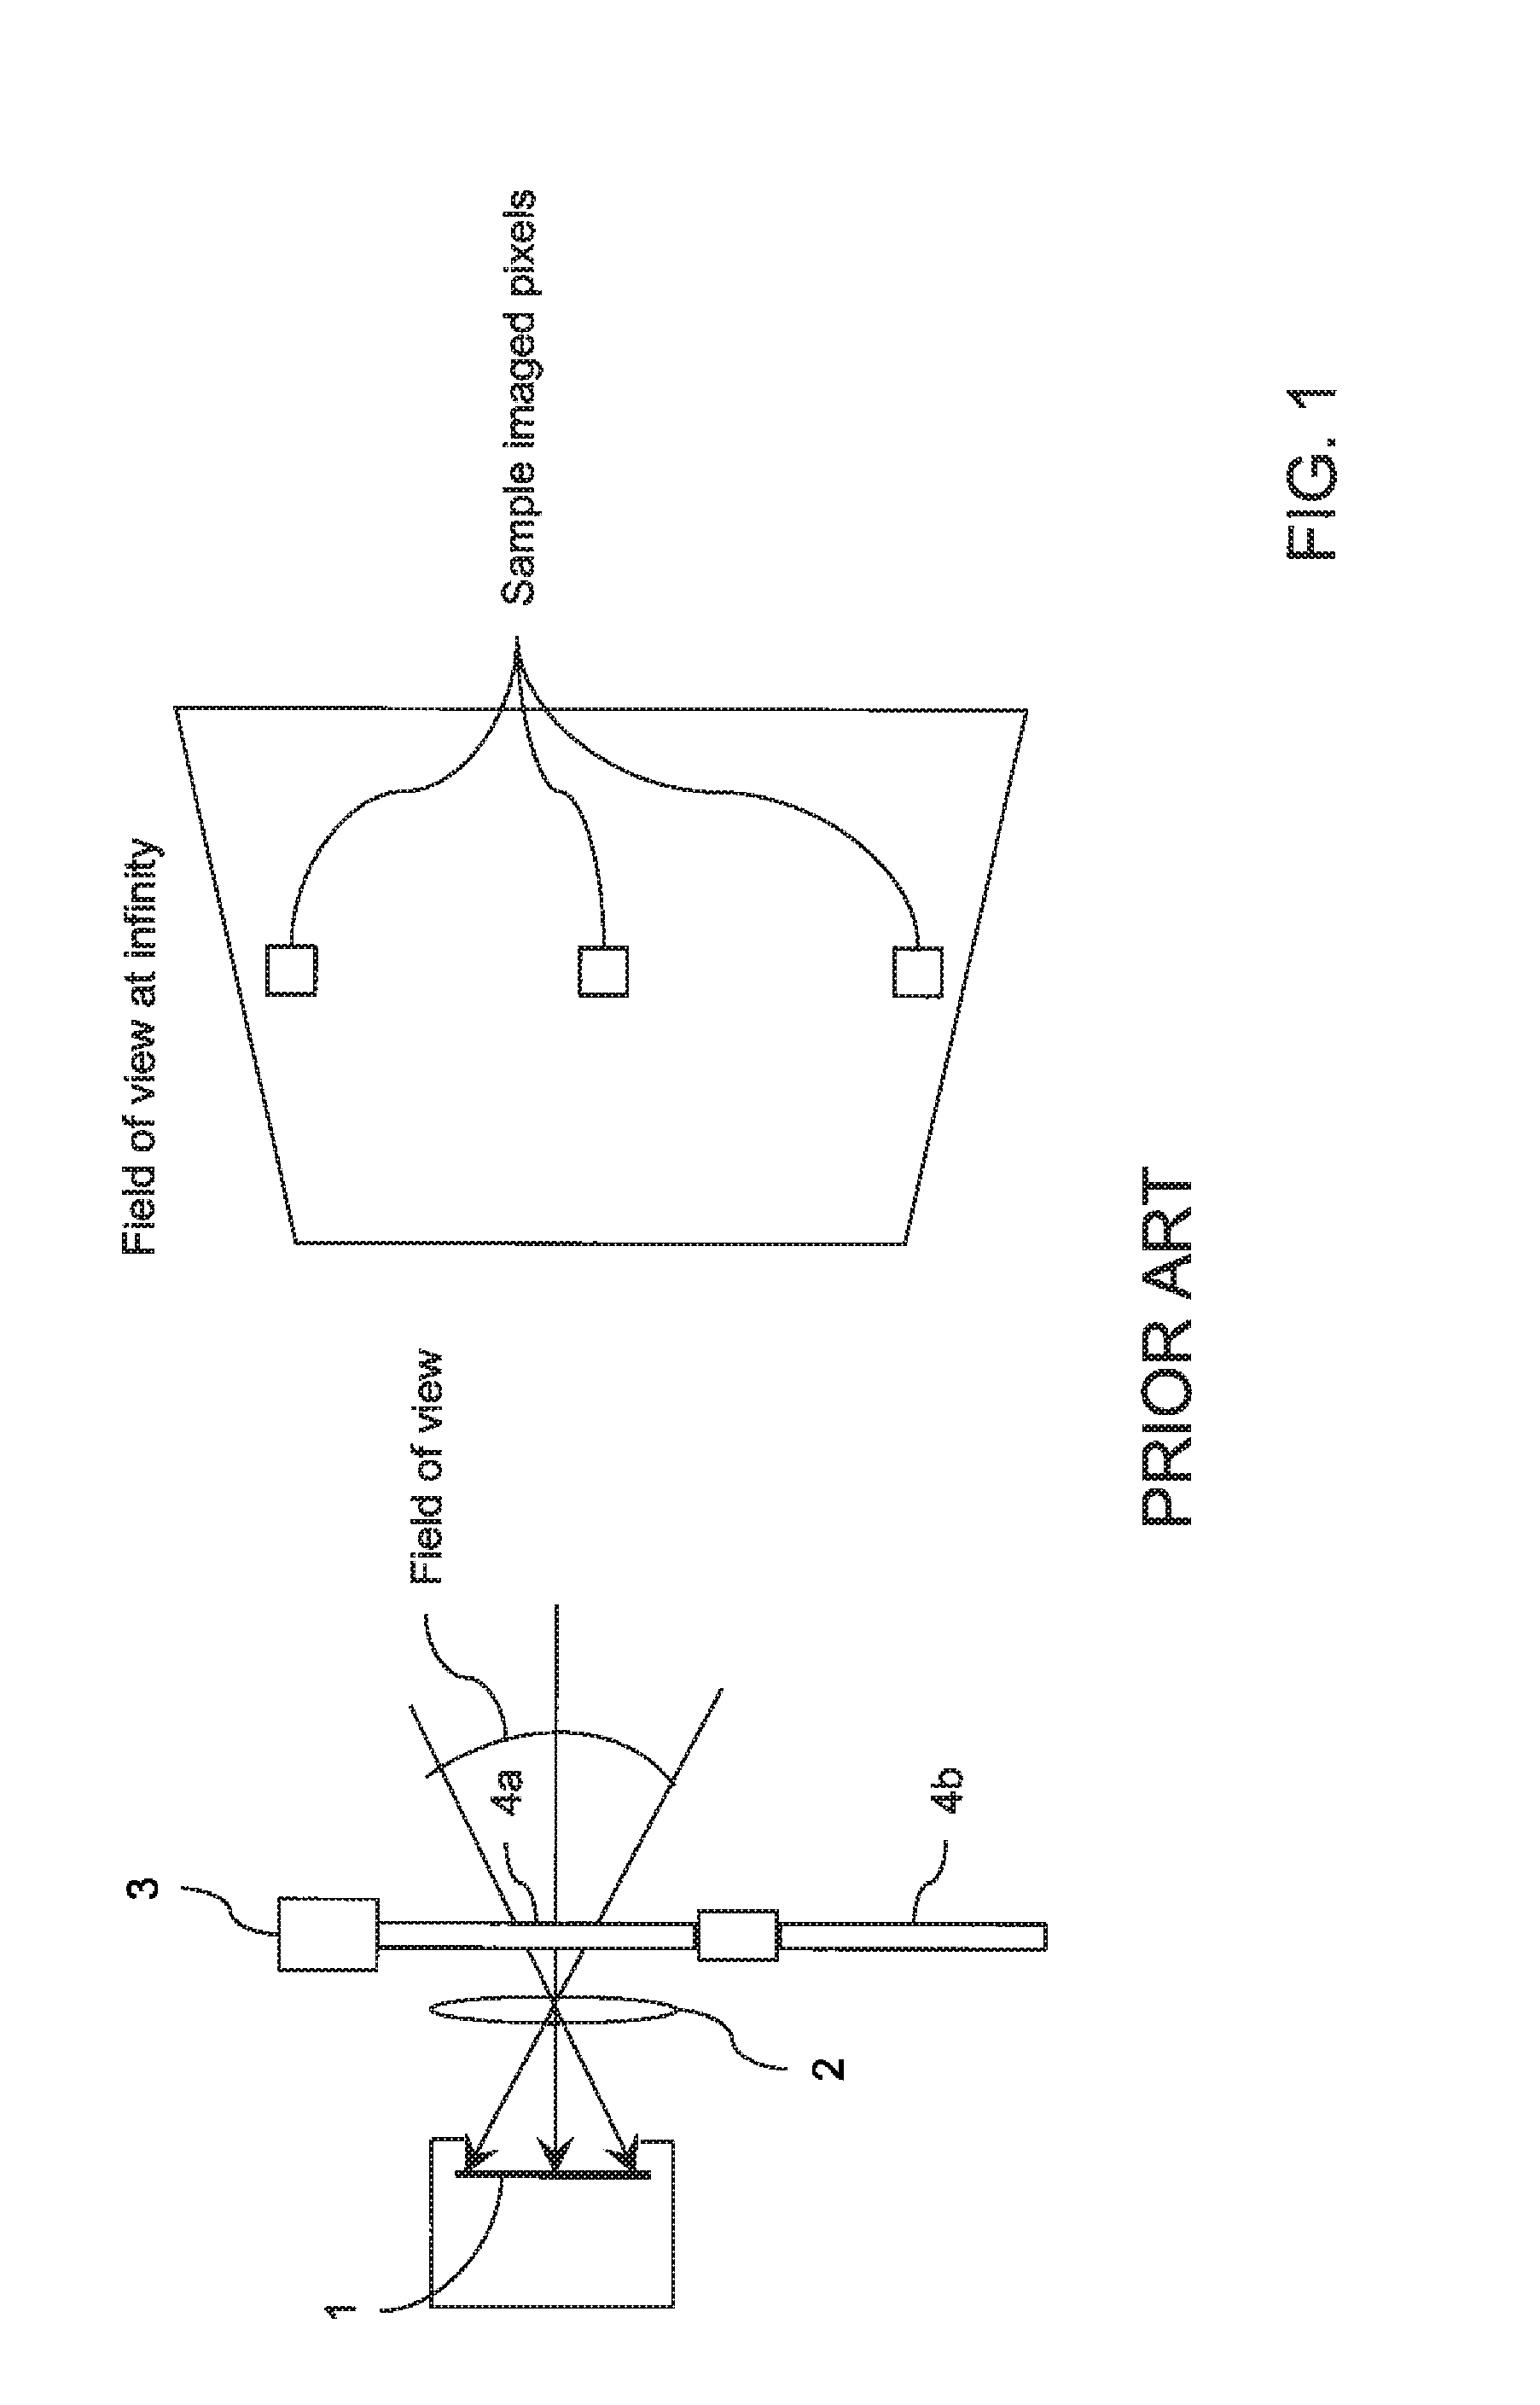 Infrared Detection and Imaging Device With No Moving Parts